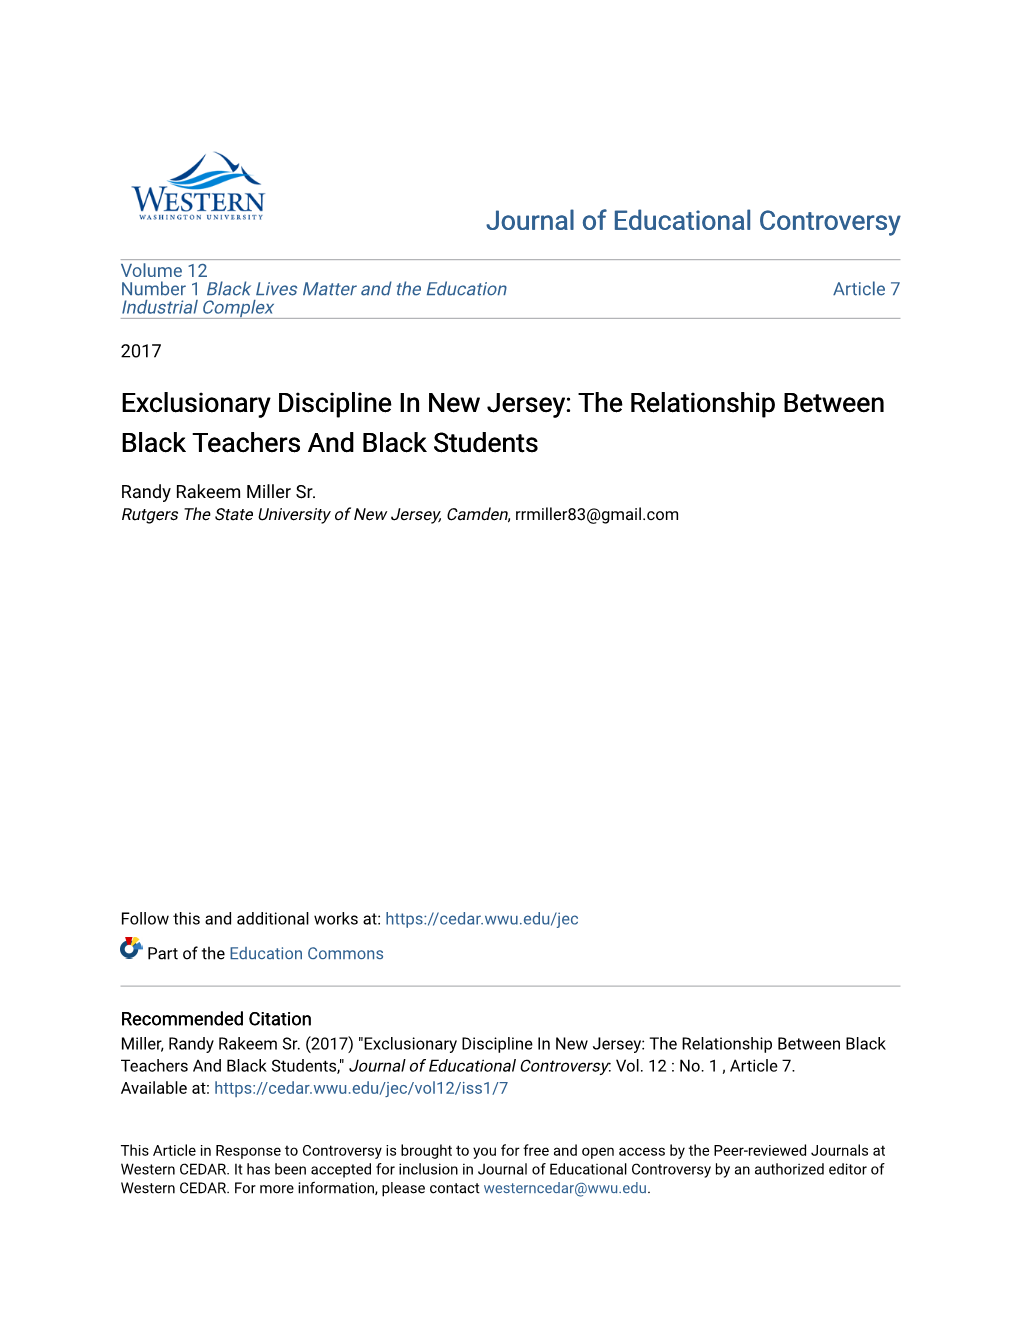 Exclusionary Discipline in New Jersey: the Relationship Between Black Teachers and Black Students